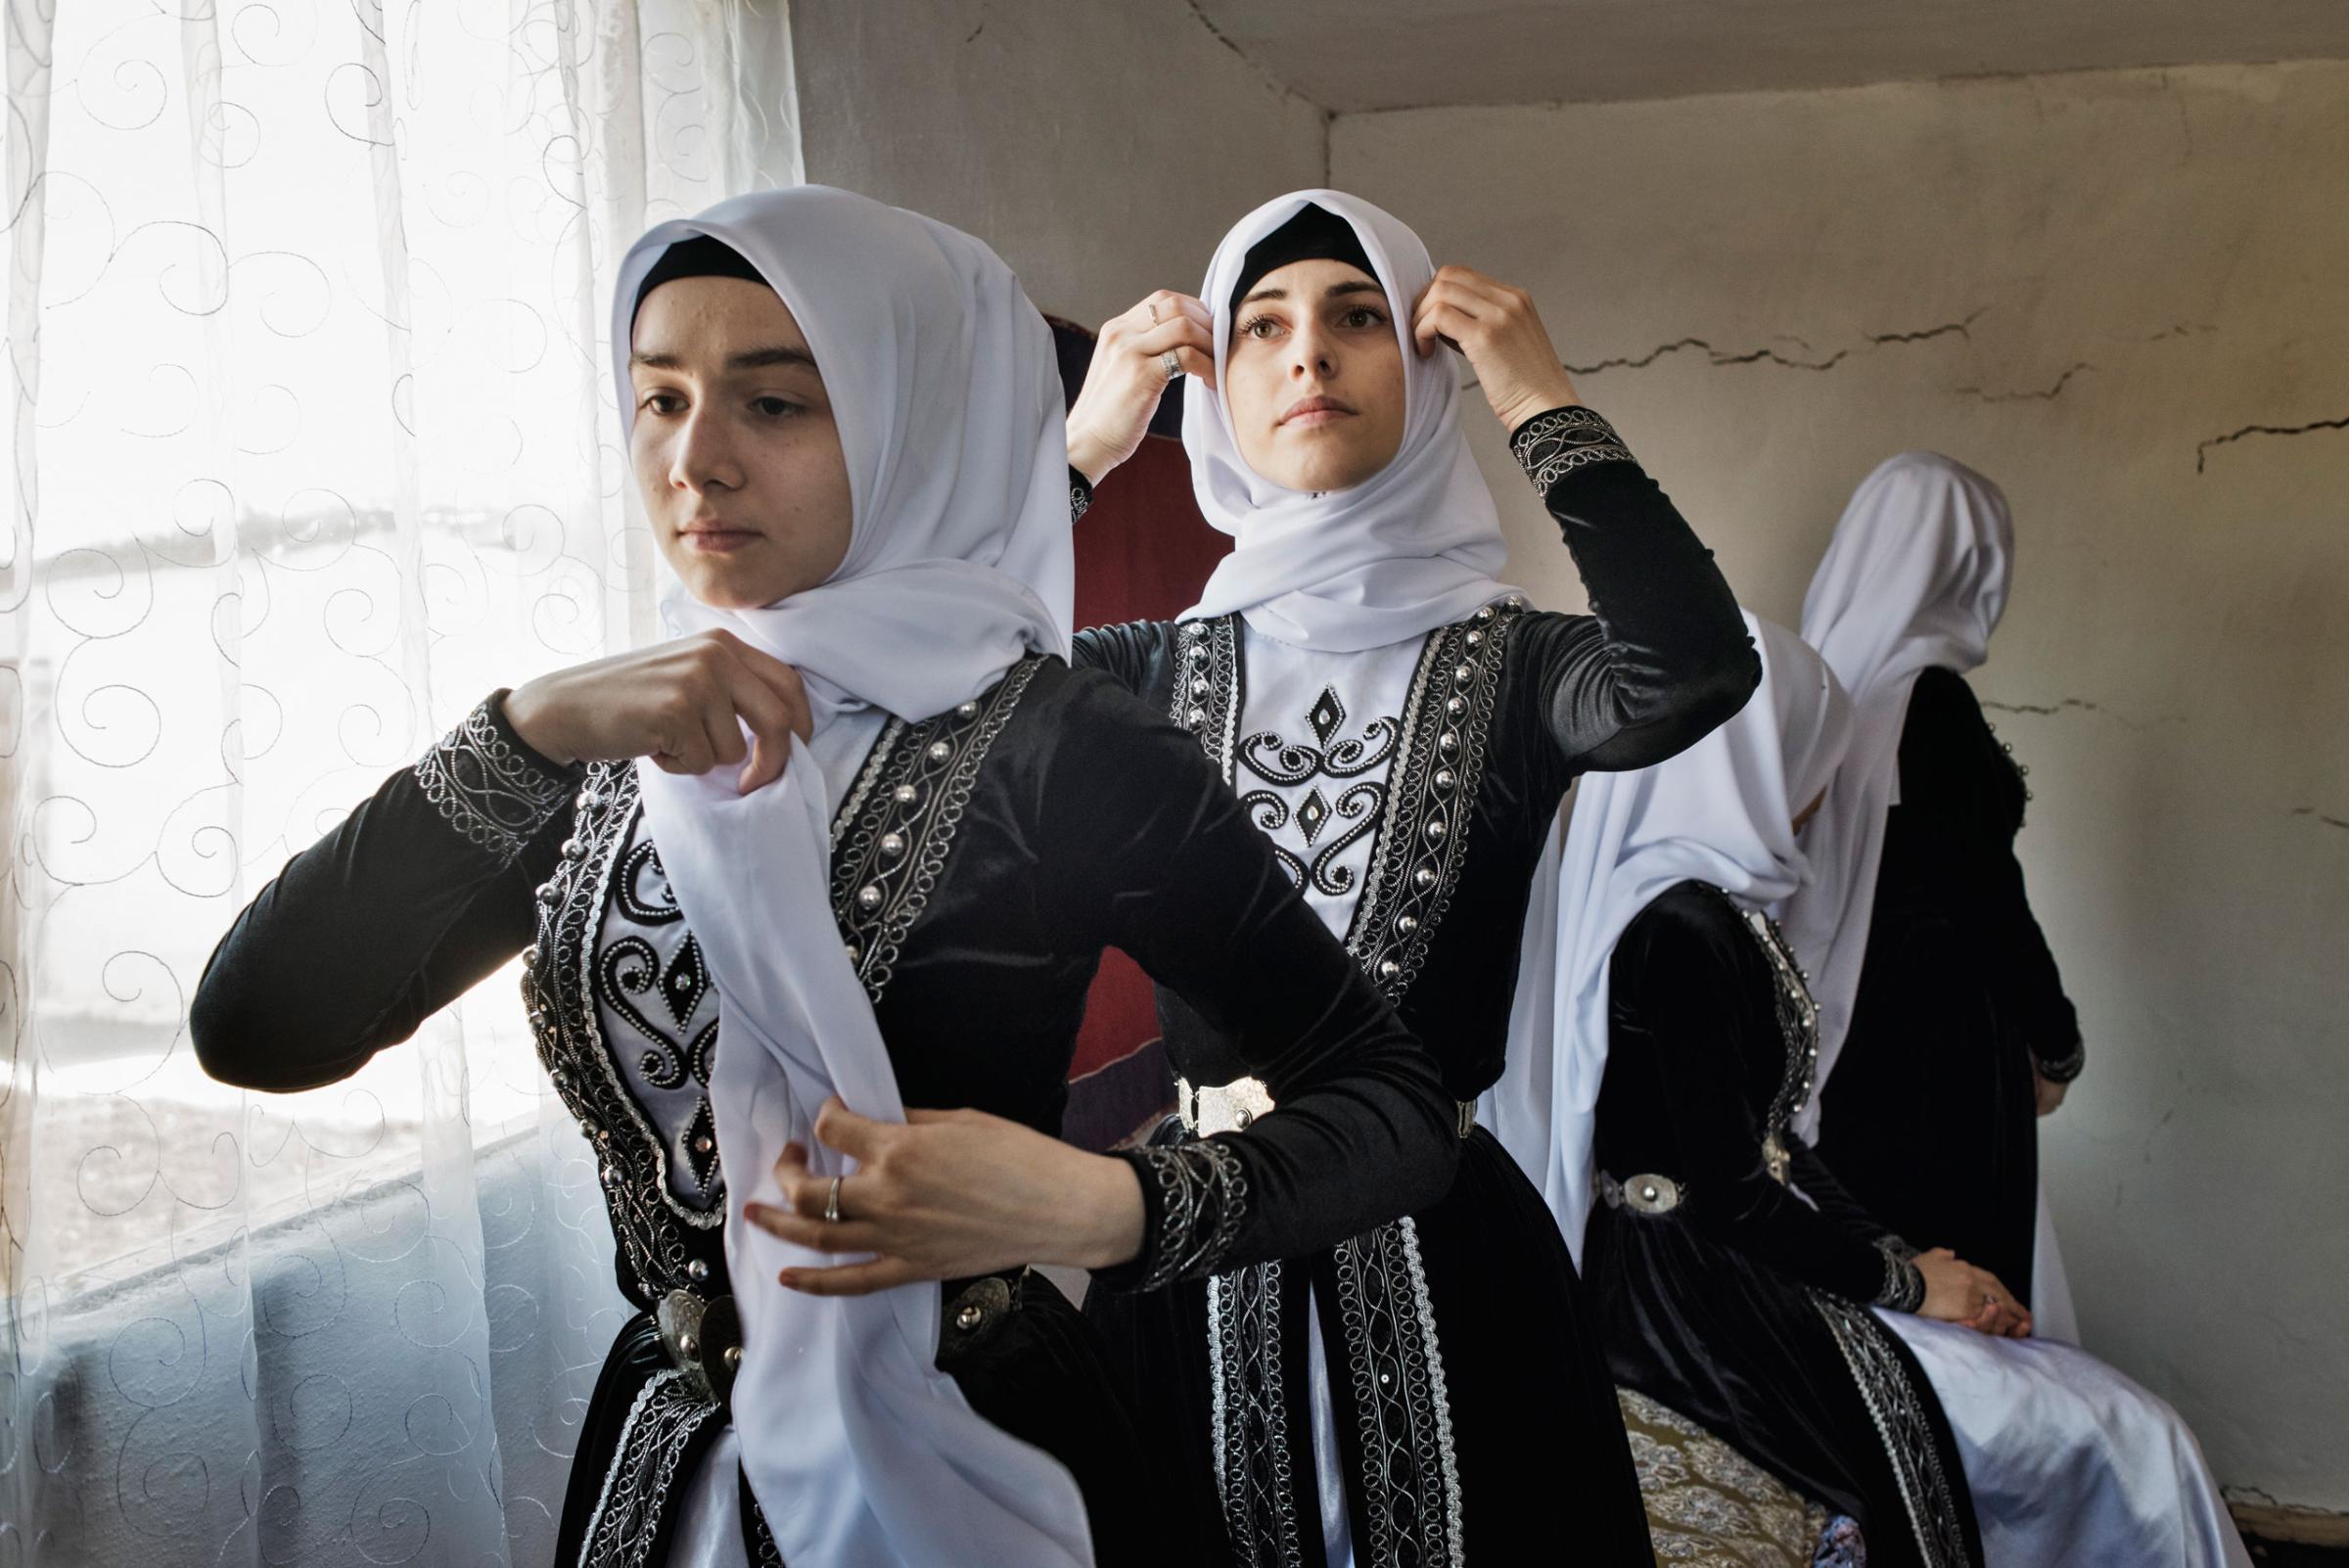 Young women in Chechnya await the arrival of Chechen leader Ramzan Kadyrov at a folk festival near the town of Shali, Chechnya, April 18, 2015. Yuri kozyrev—NOOR for TIME